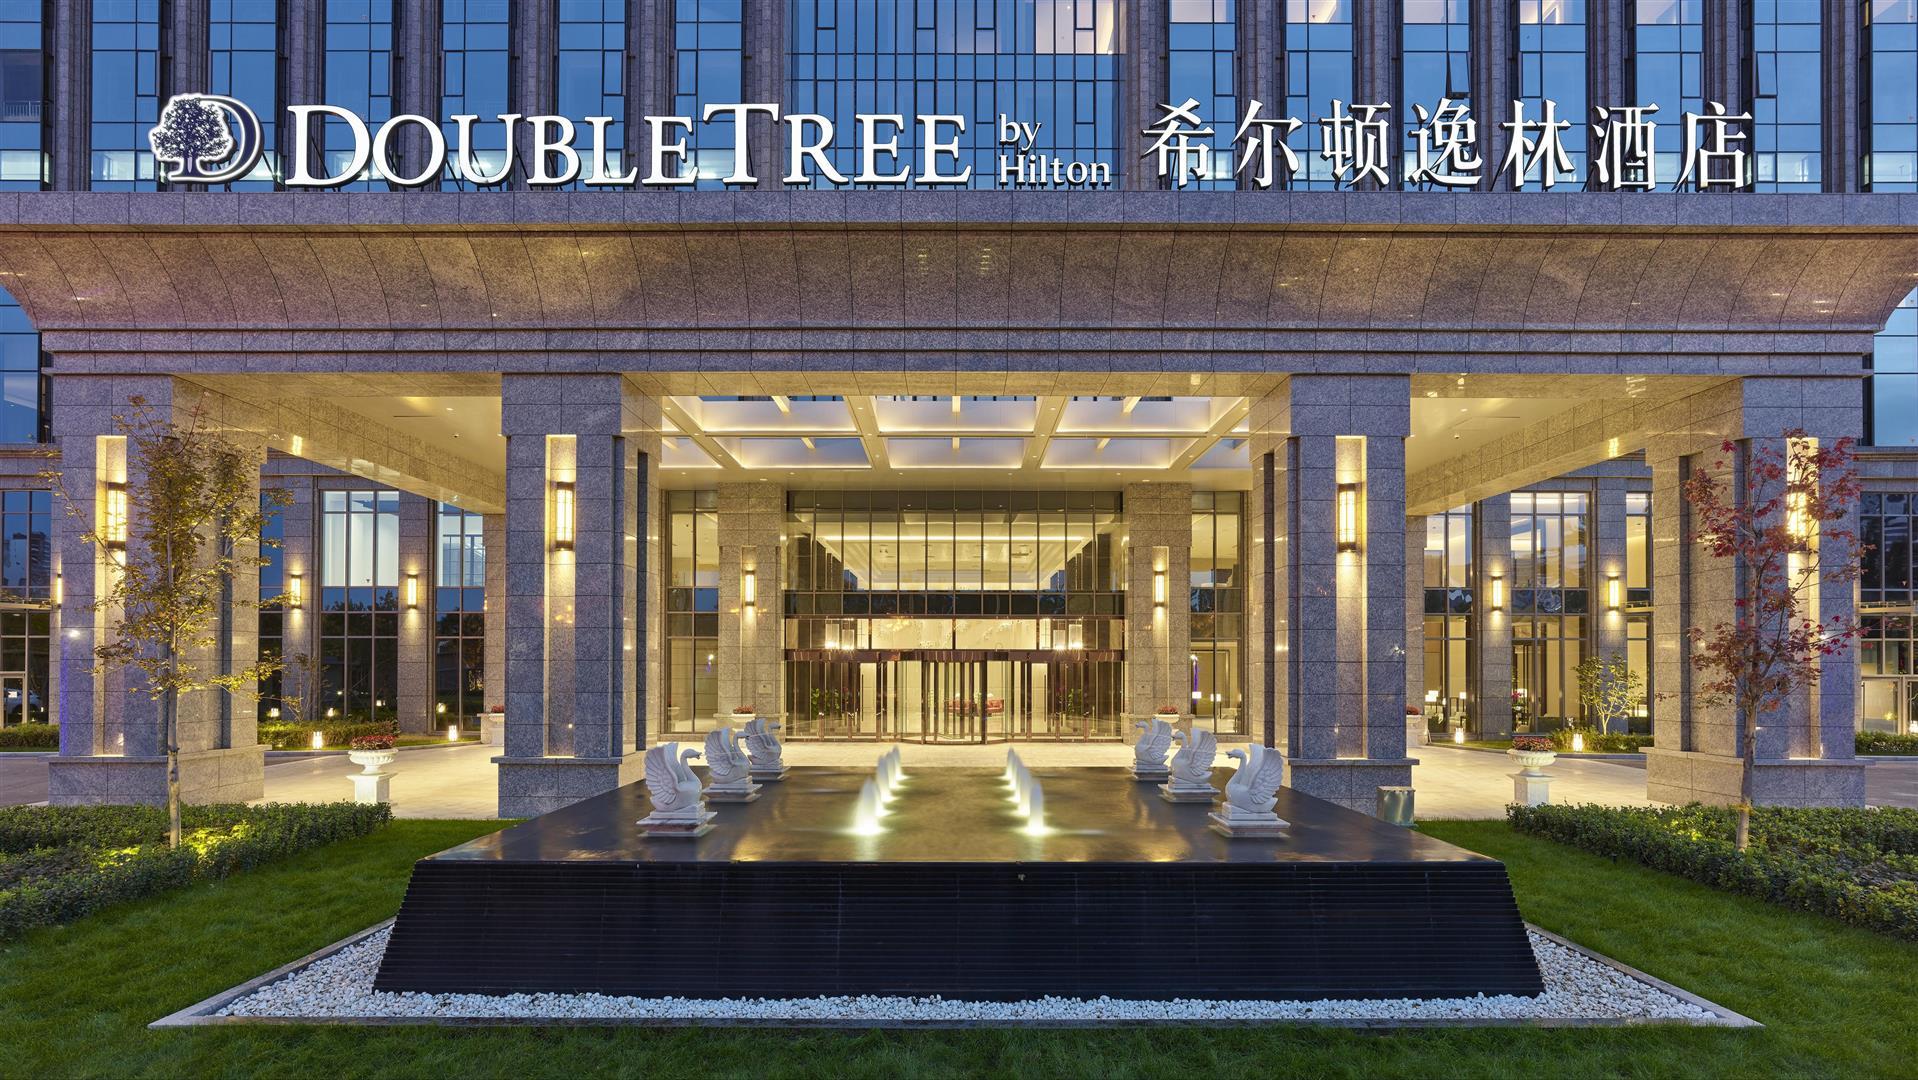 DoubleTree by Hilton Baoding in Baoding, Hebei Province, CN